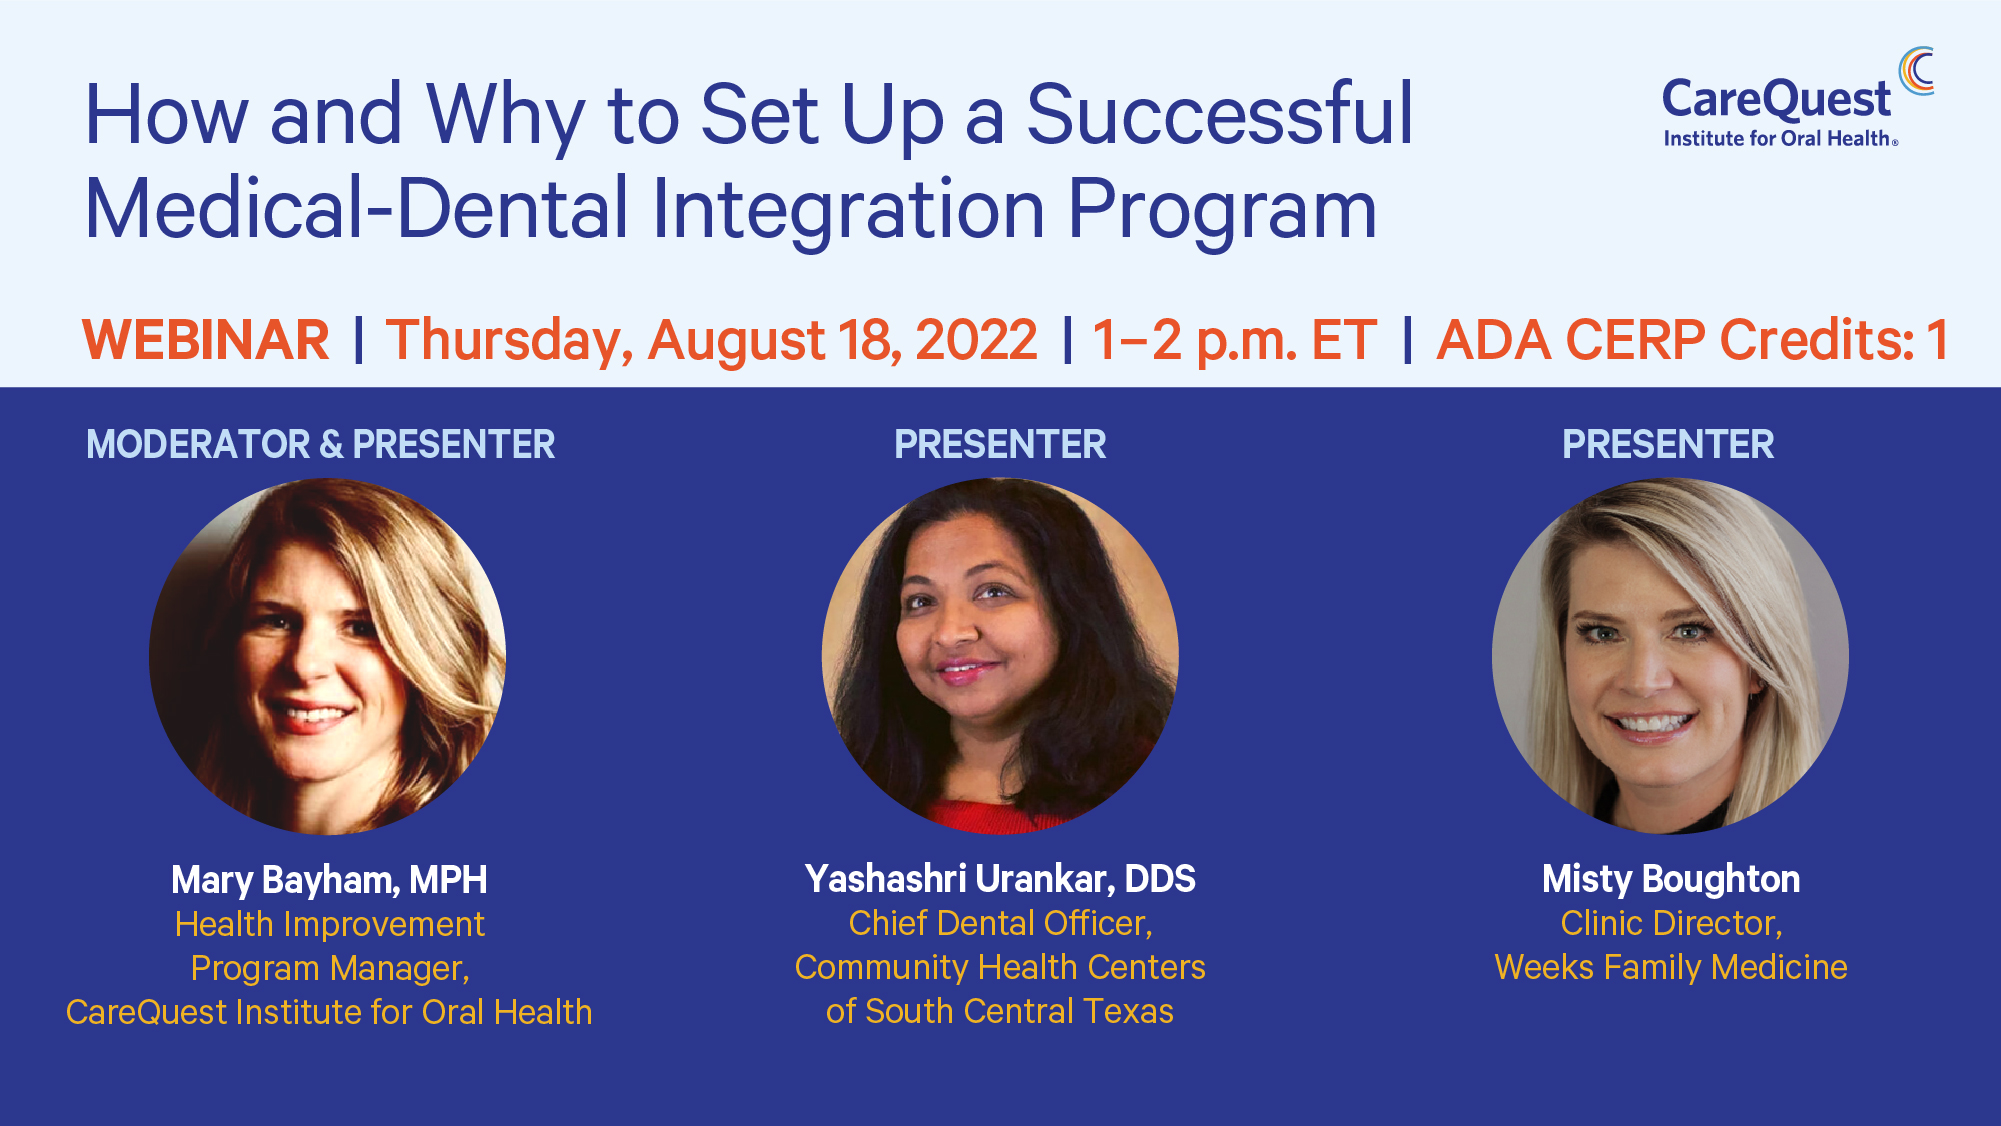 How and Why to Set Up a Successful Medical-Dental Integration Program